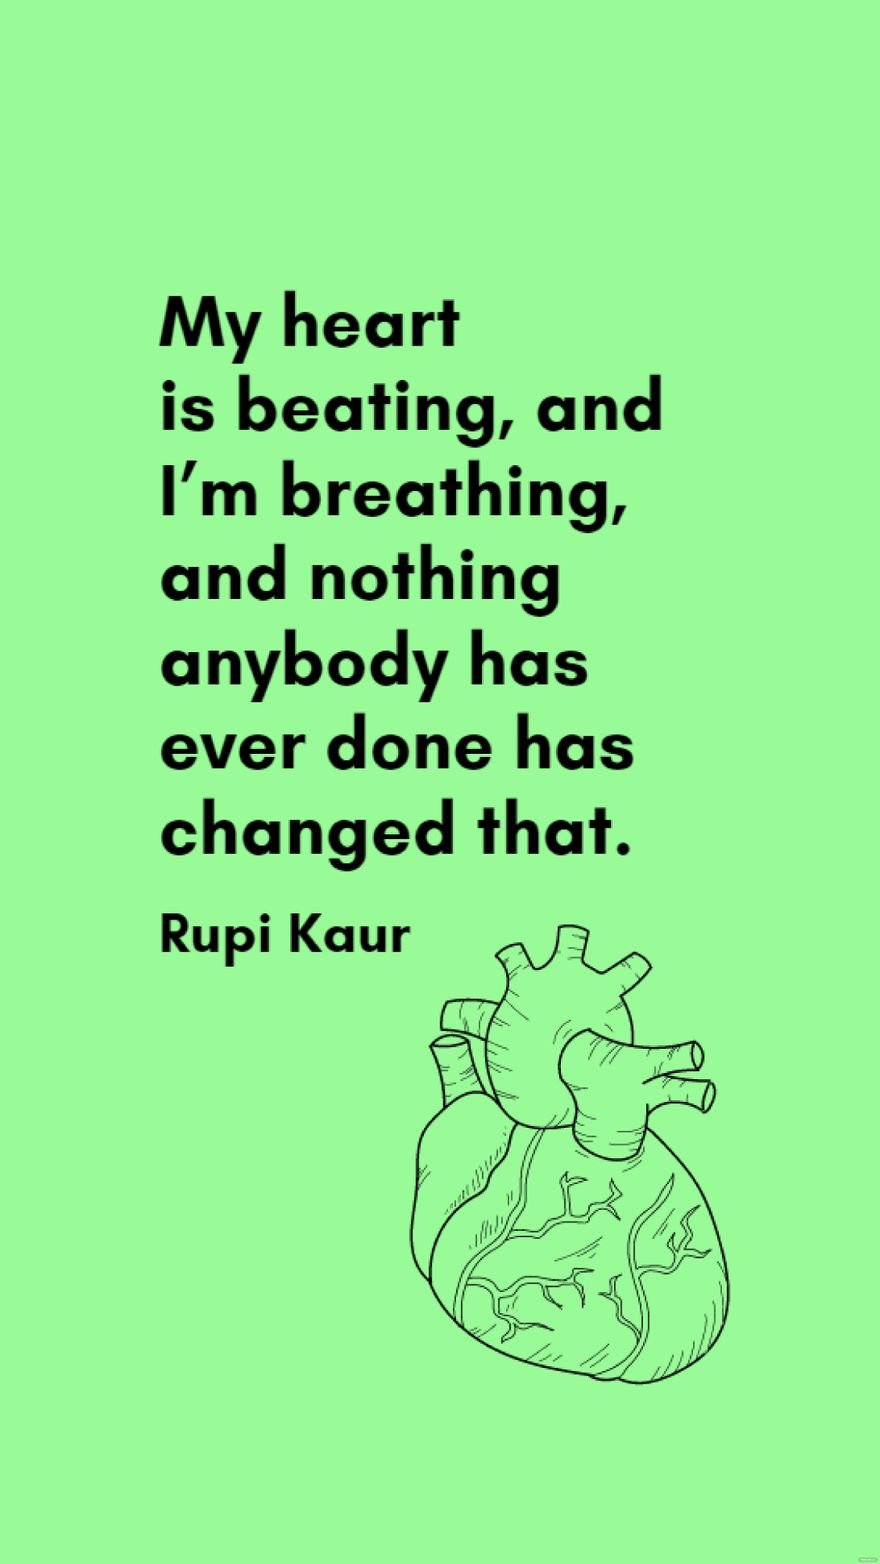 Rupi Kaur - My heart is beating, and I’m breathing, and nothing anybody has ever done has changed that.